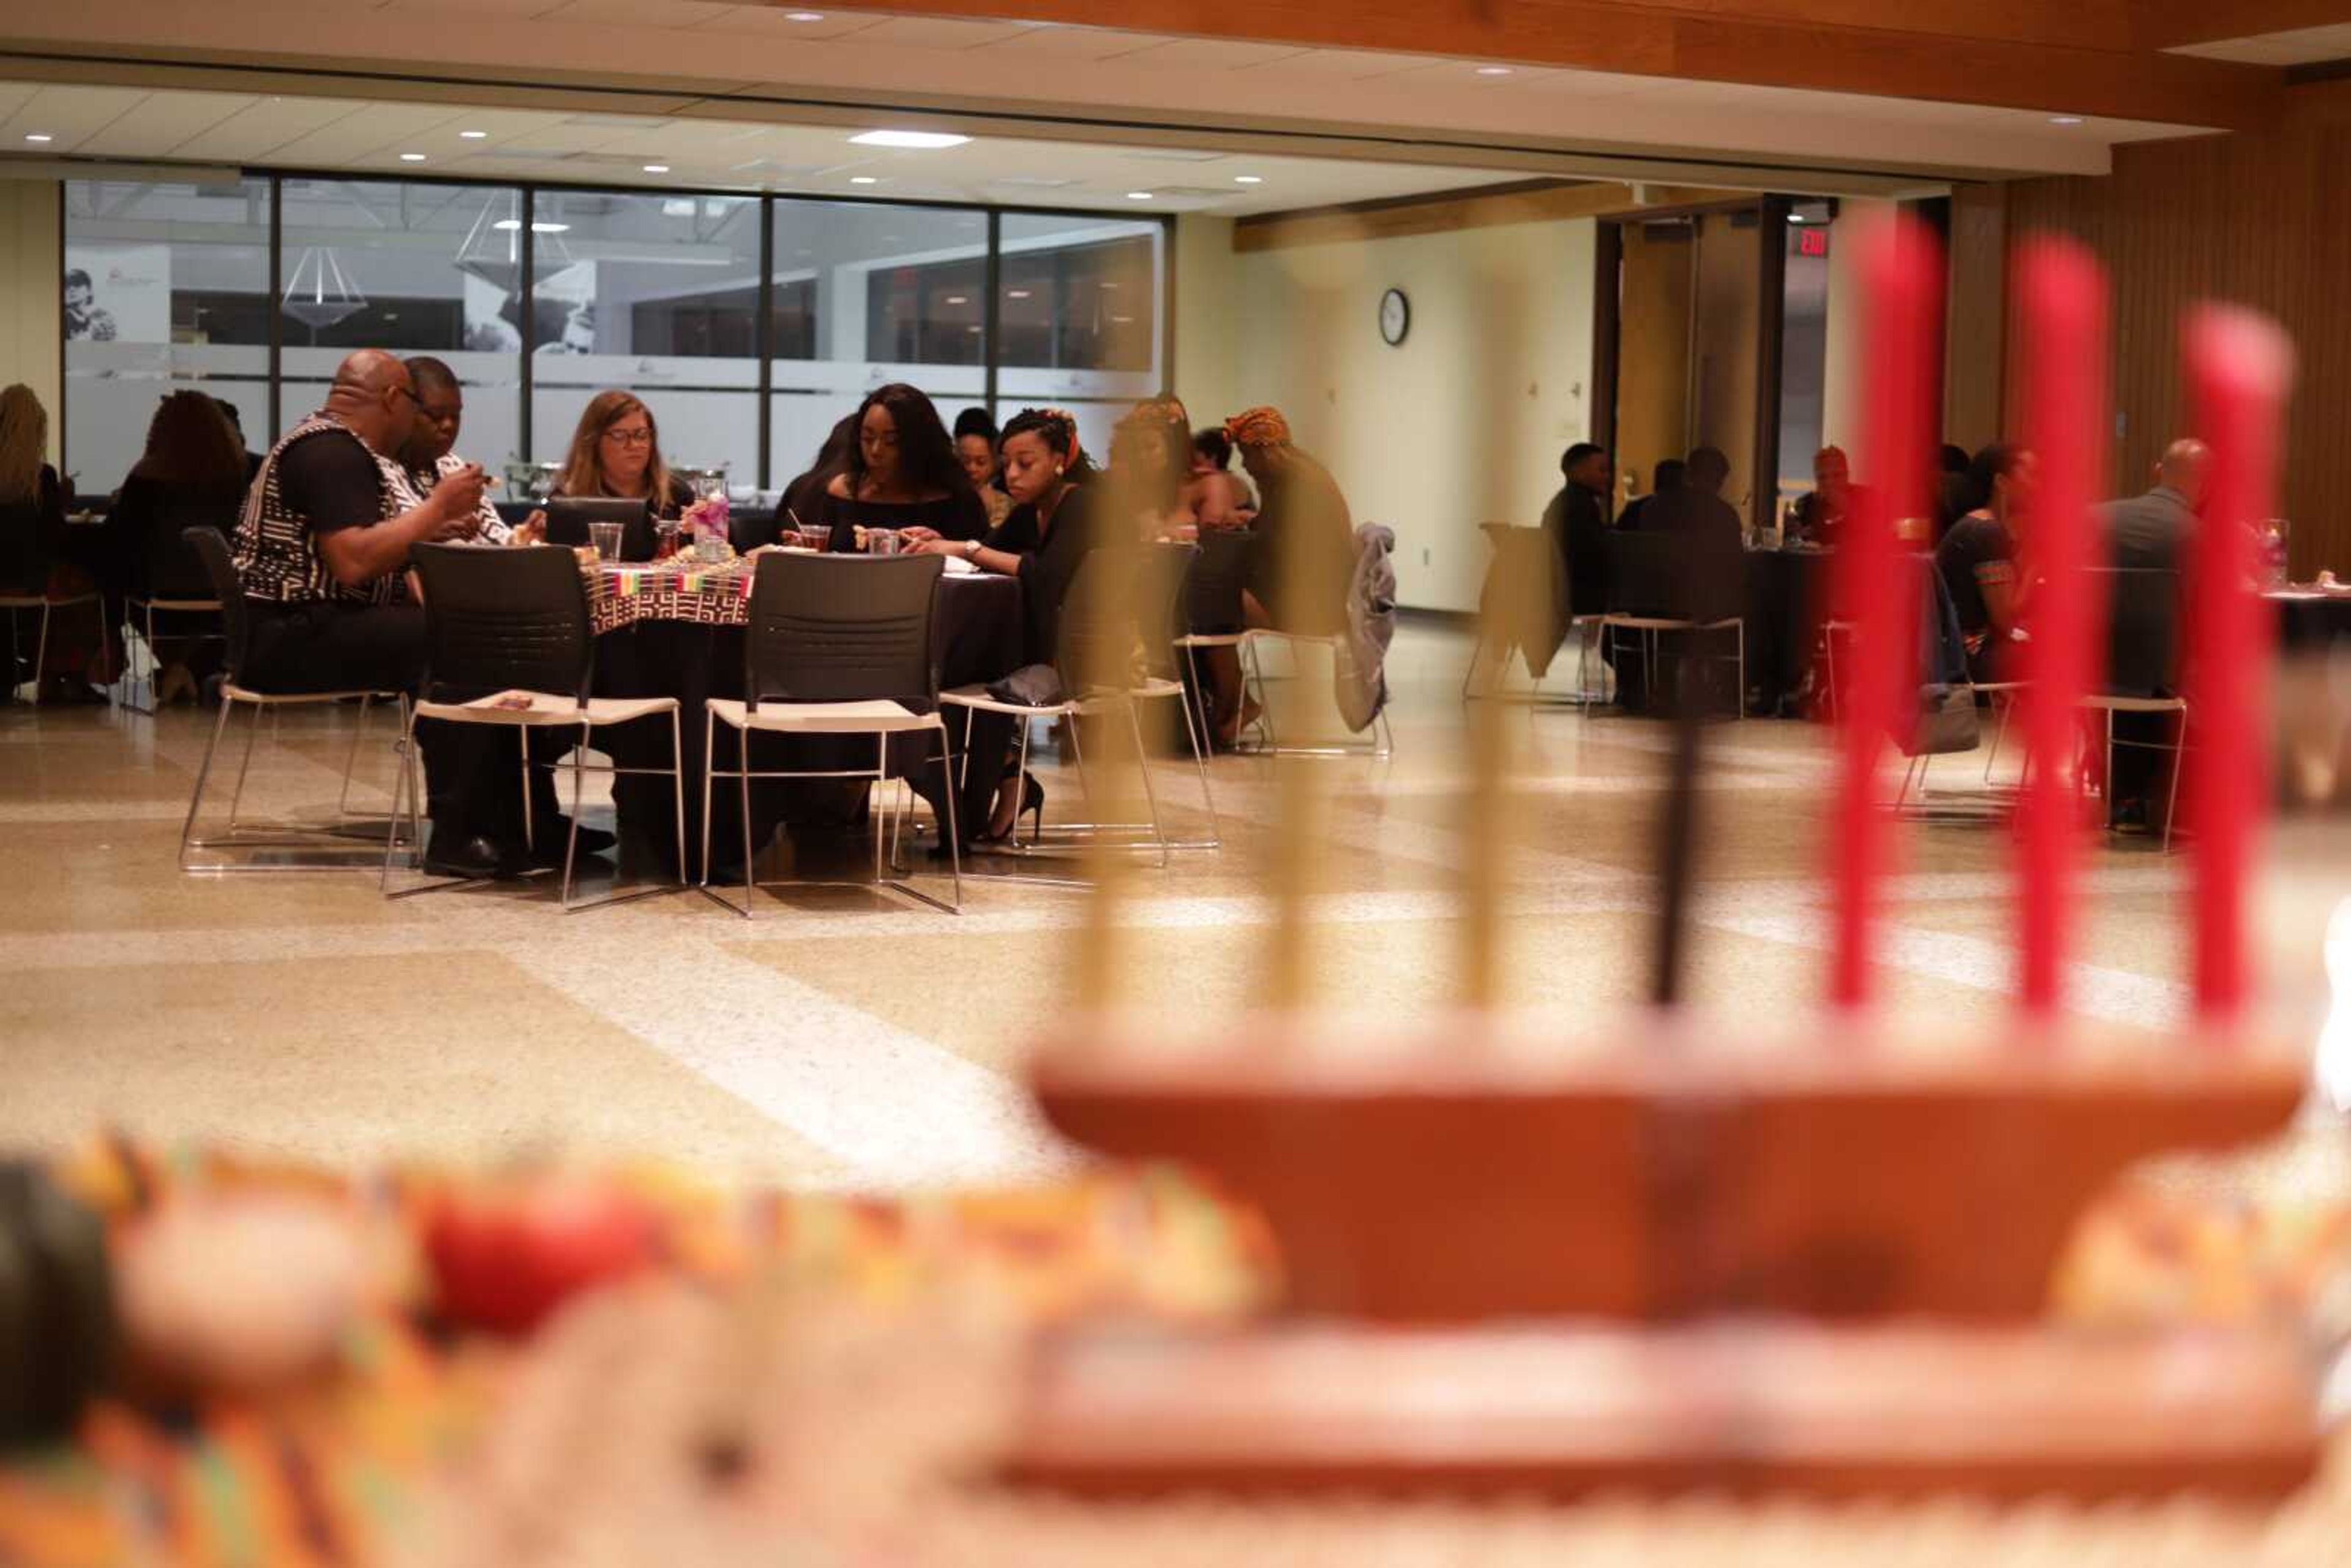 Students, faculty, and guest enjoy the ambiance, great food, and presentations during the BSU Ball held March 23.